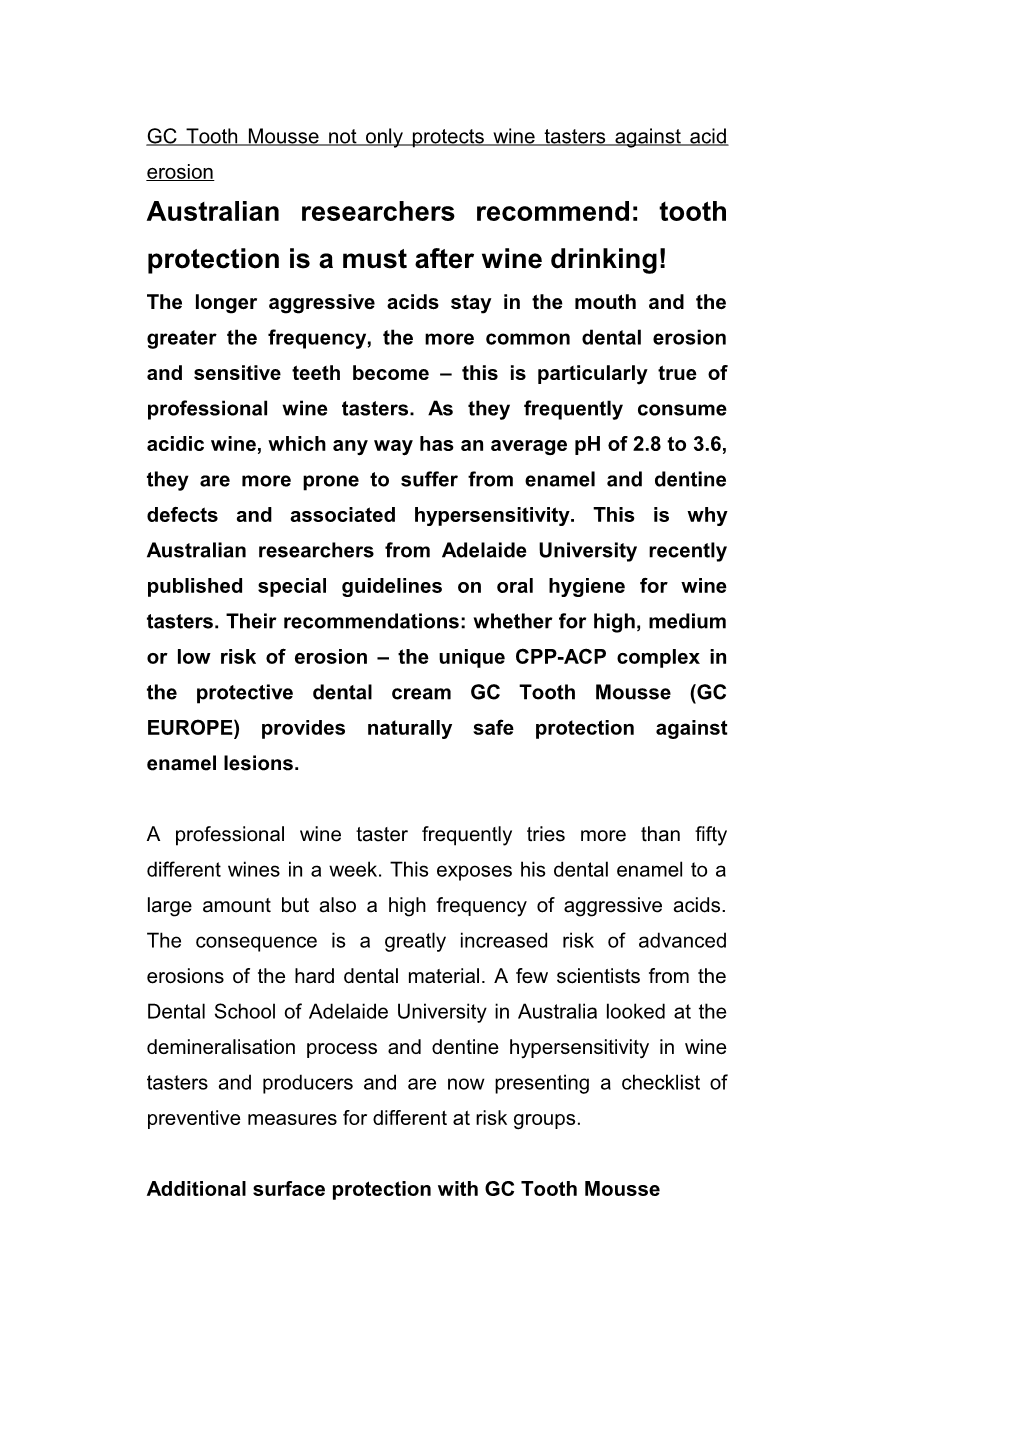 Australian Researchers Recommend: Tooth Protection Is a Must After Wine Drinking!